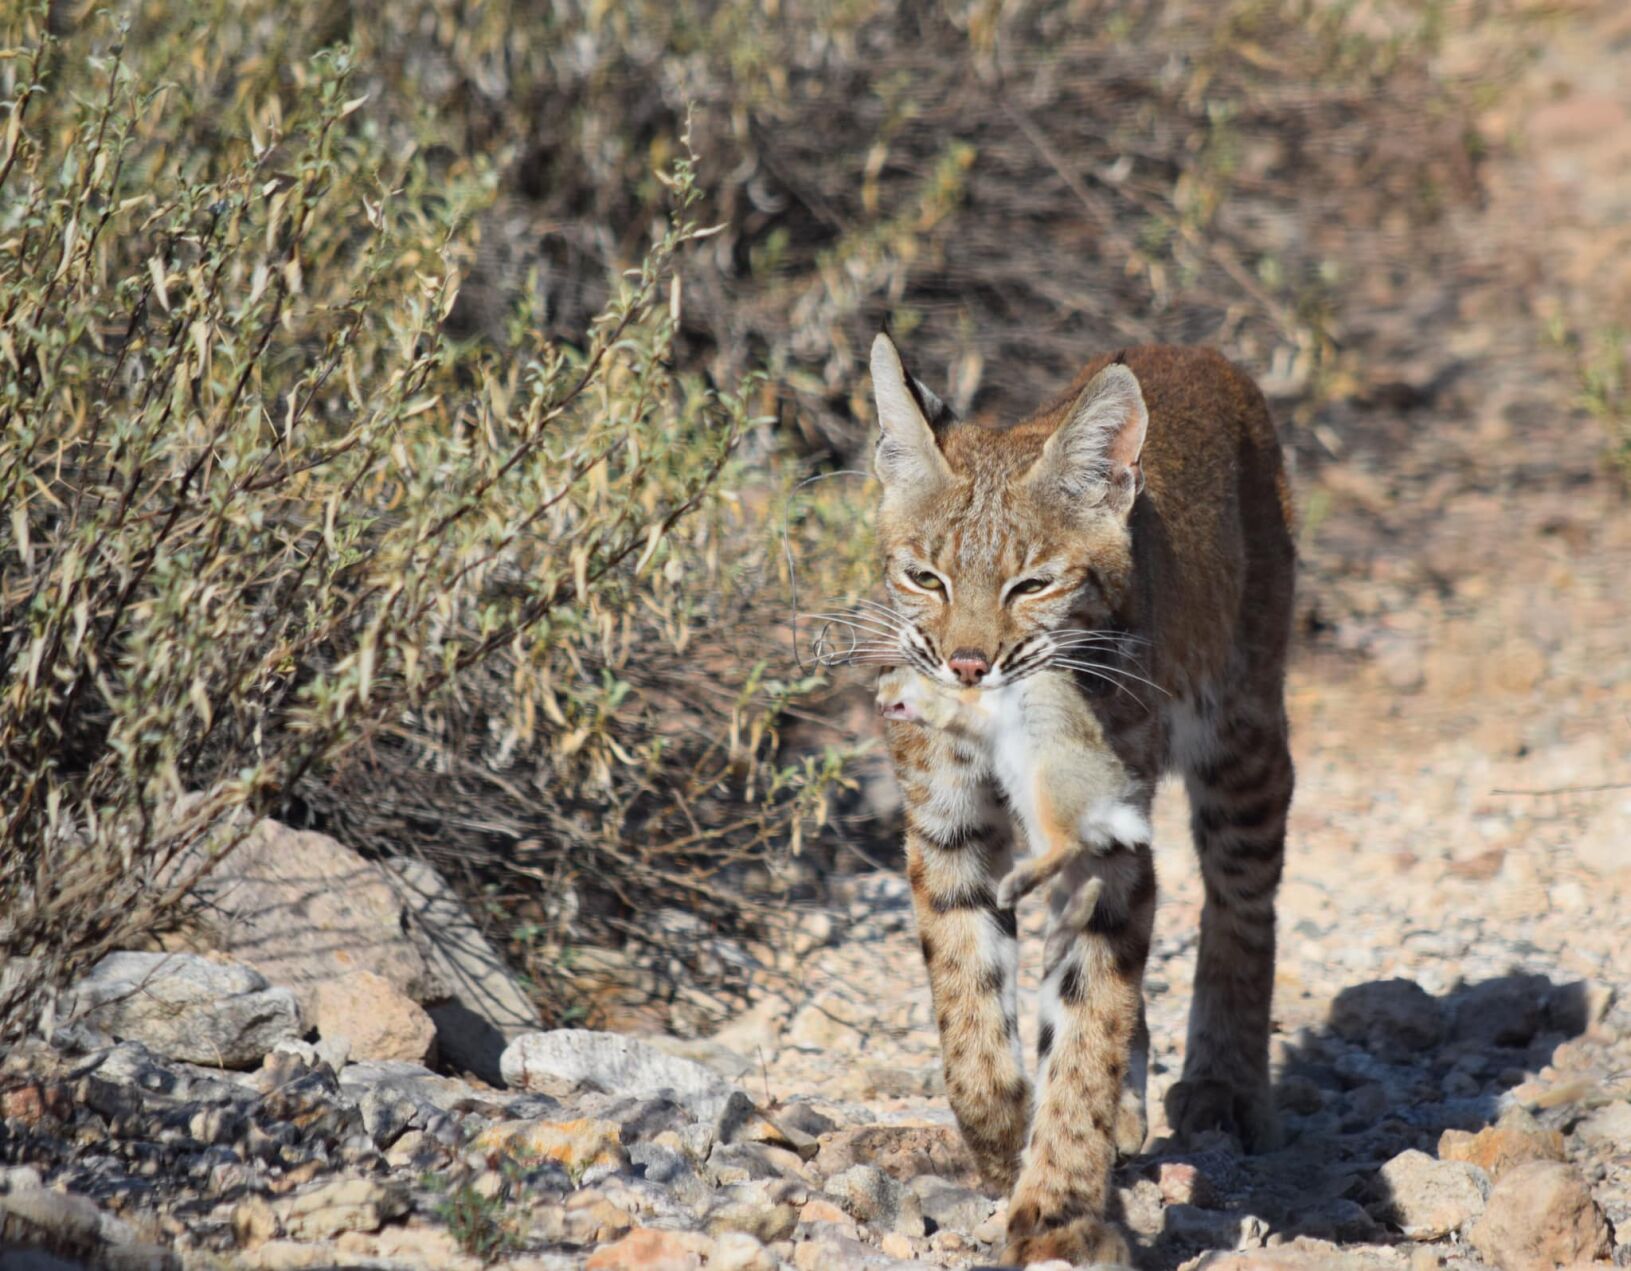 Reward offered for information on illegally killed bobcat on west